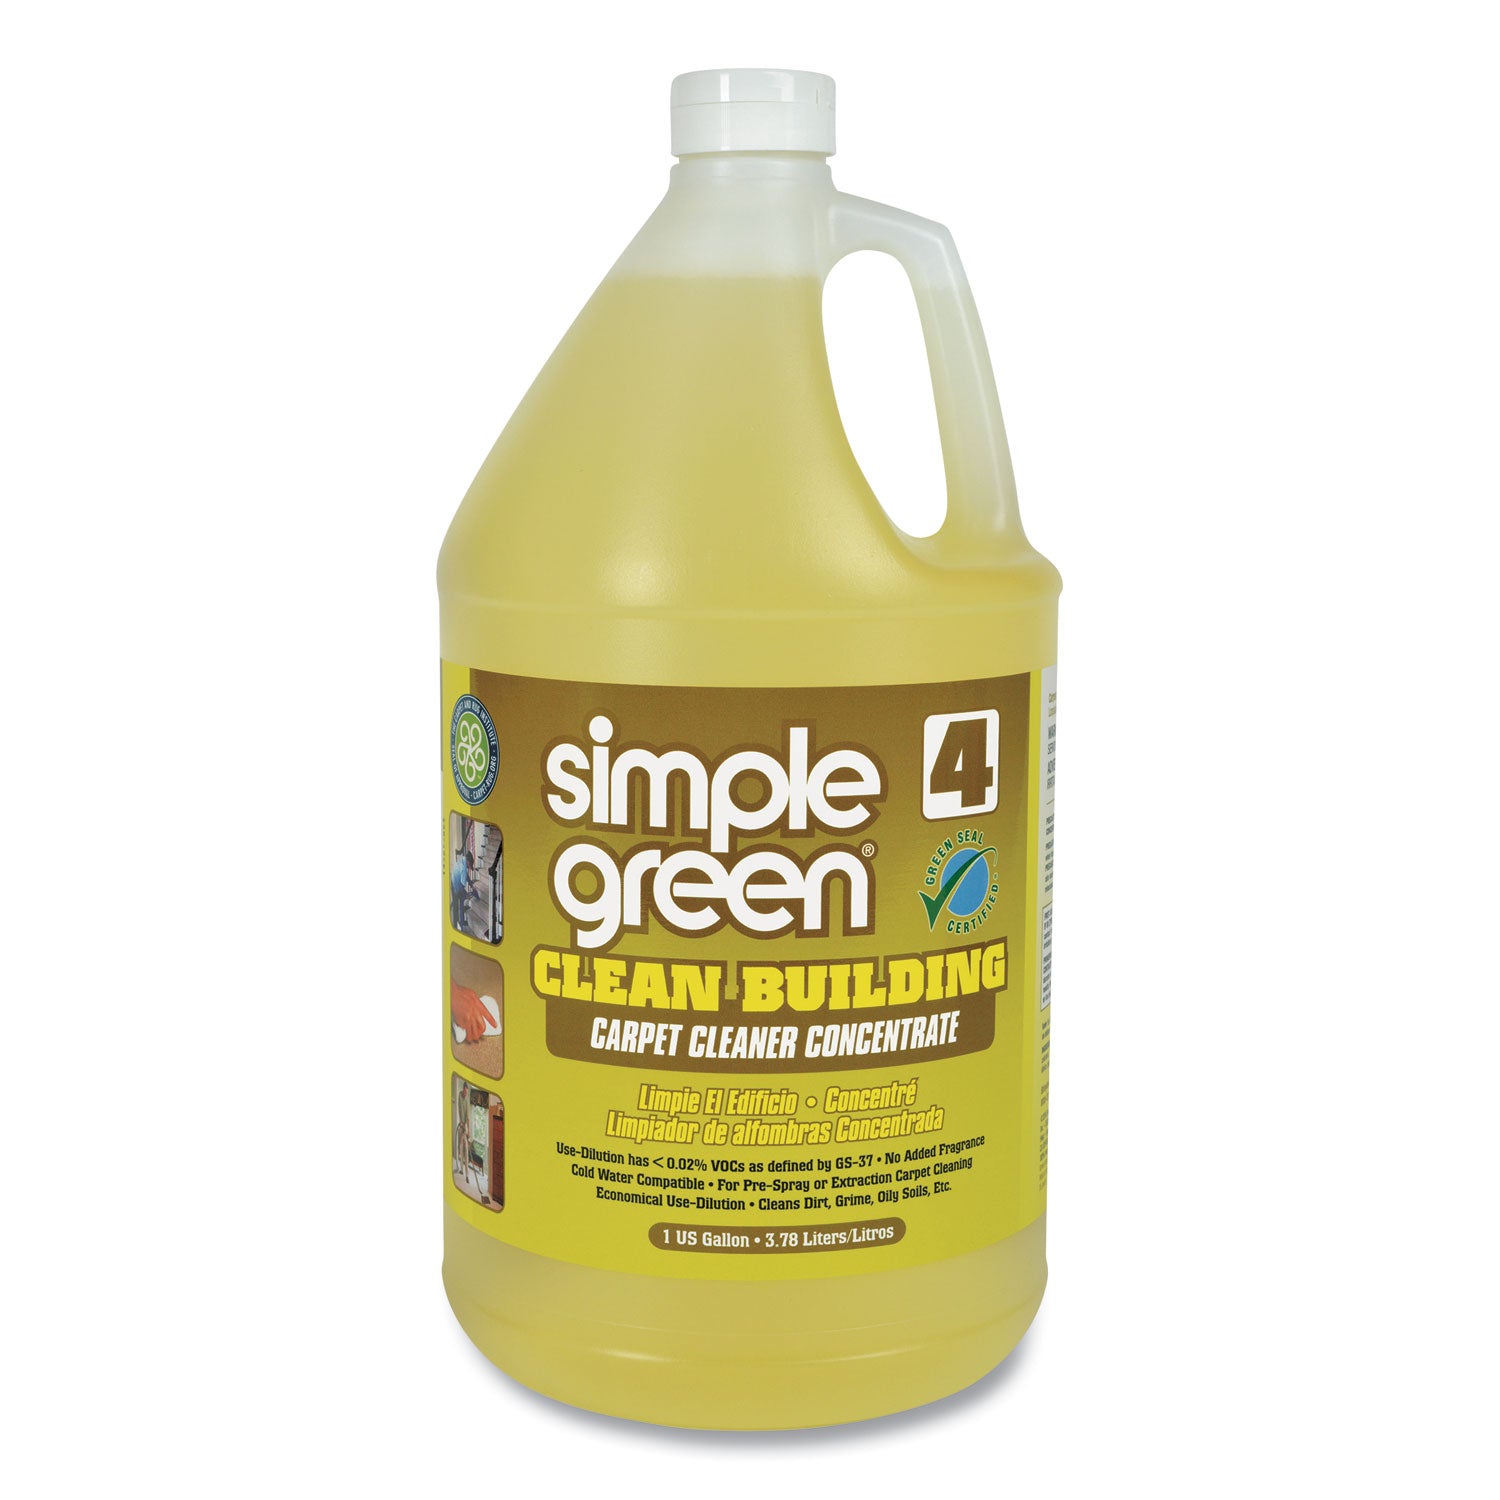 Clean Building Carpet Cleaner Concentrate, Unscented, 1gal Bottle - 